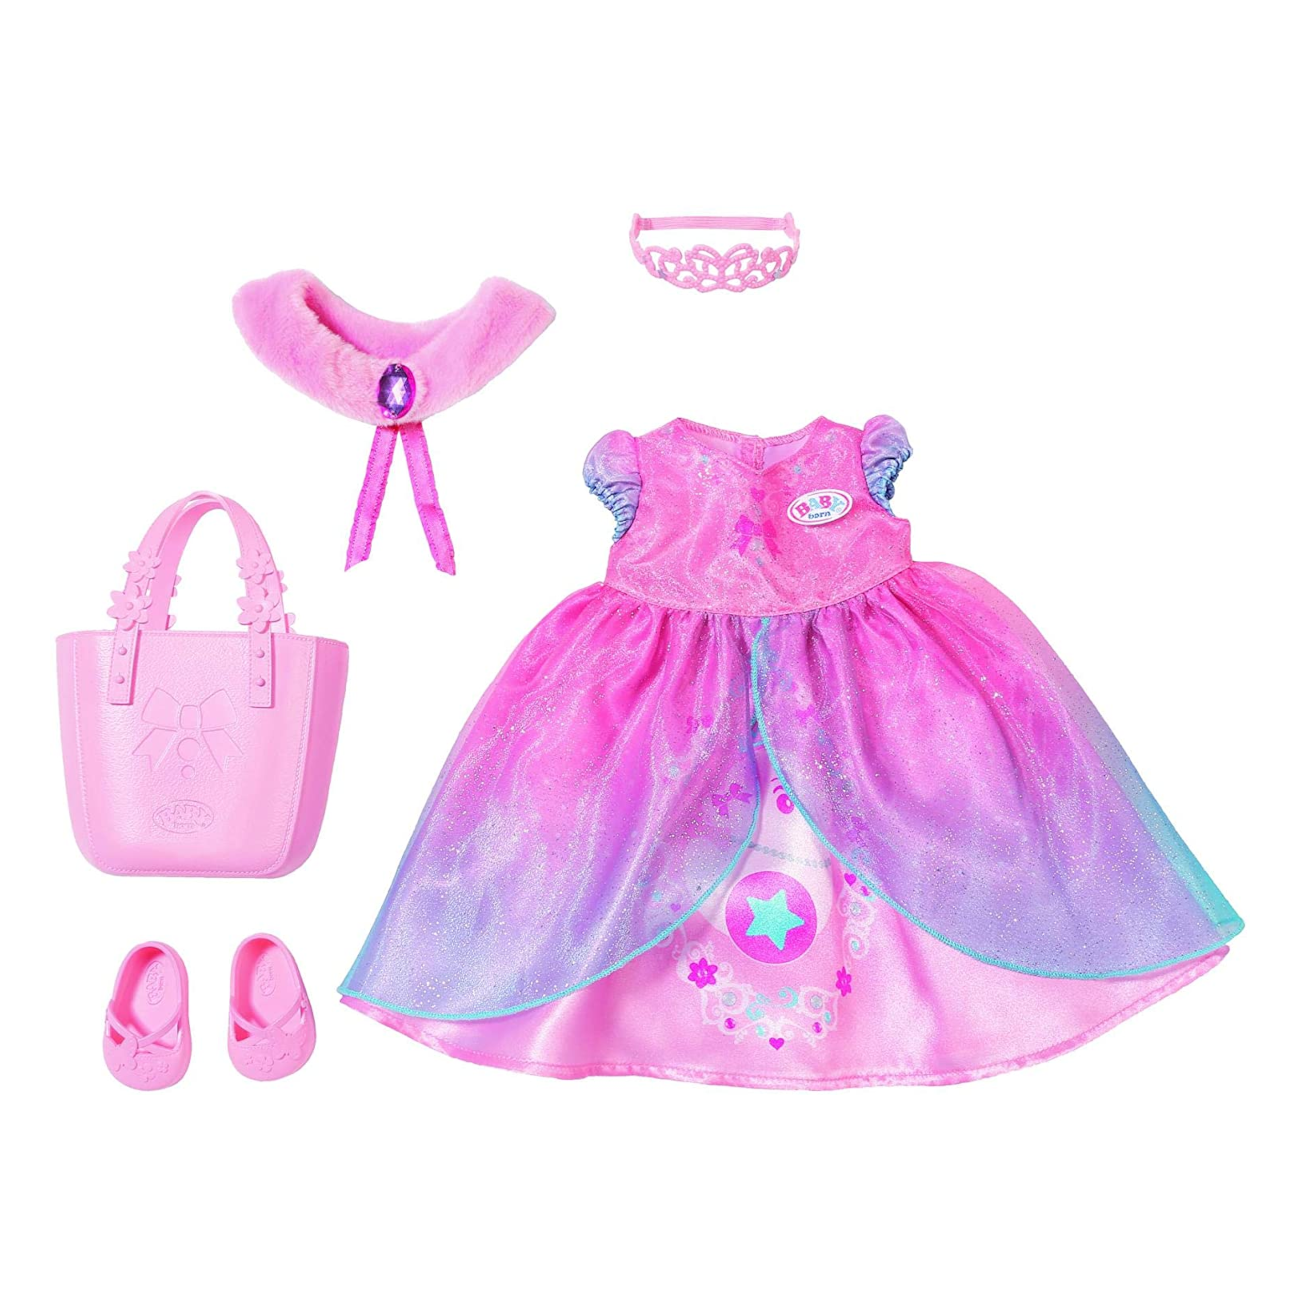 BABY born Prinzessin Outfit (Zapf Creation)